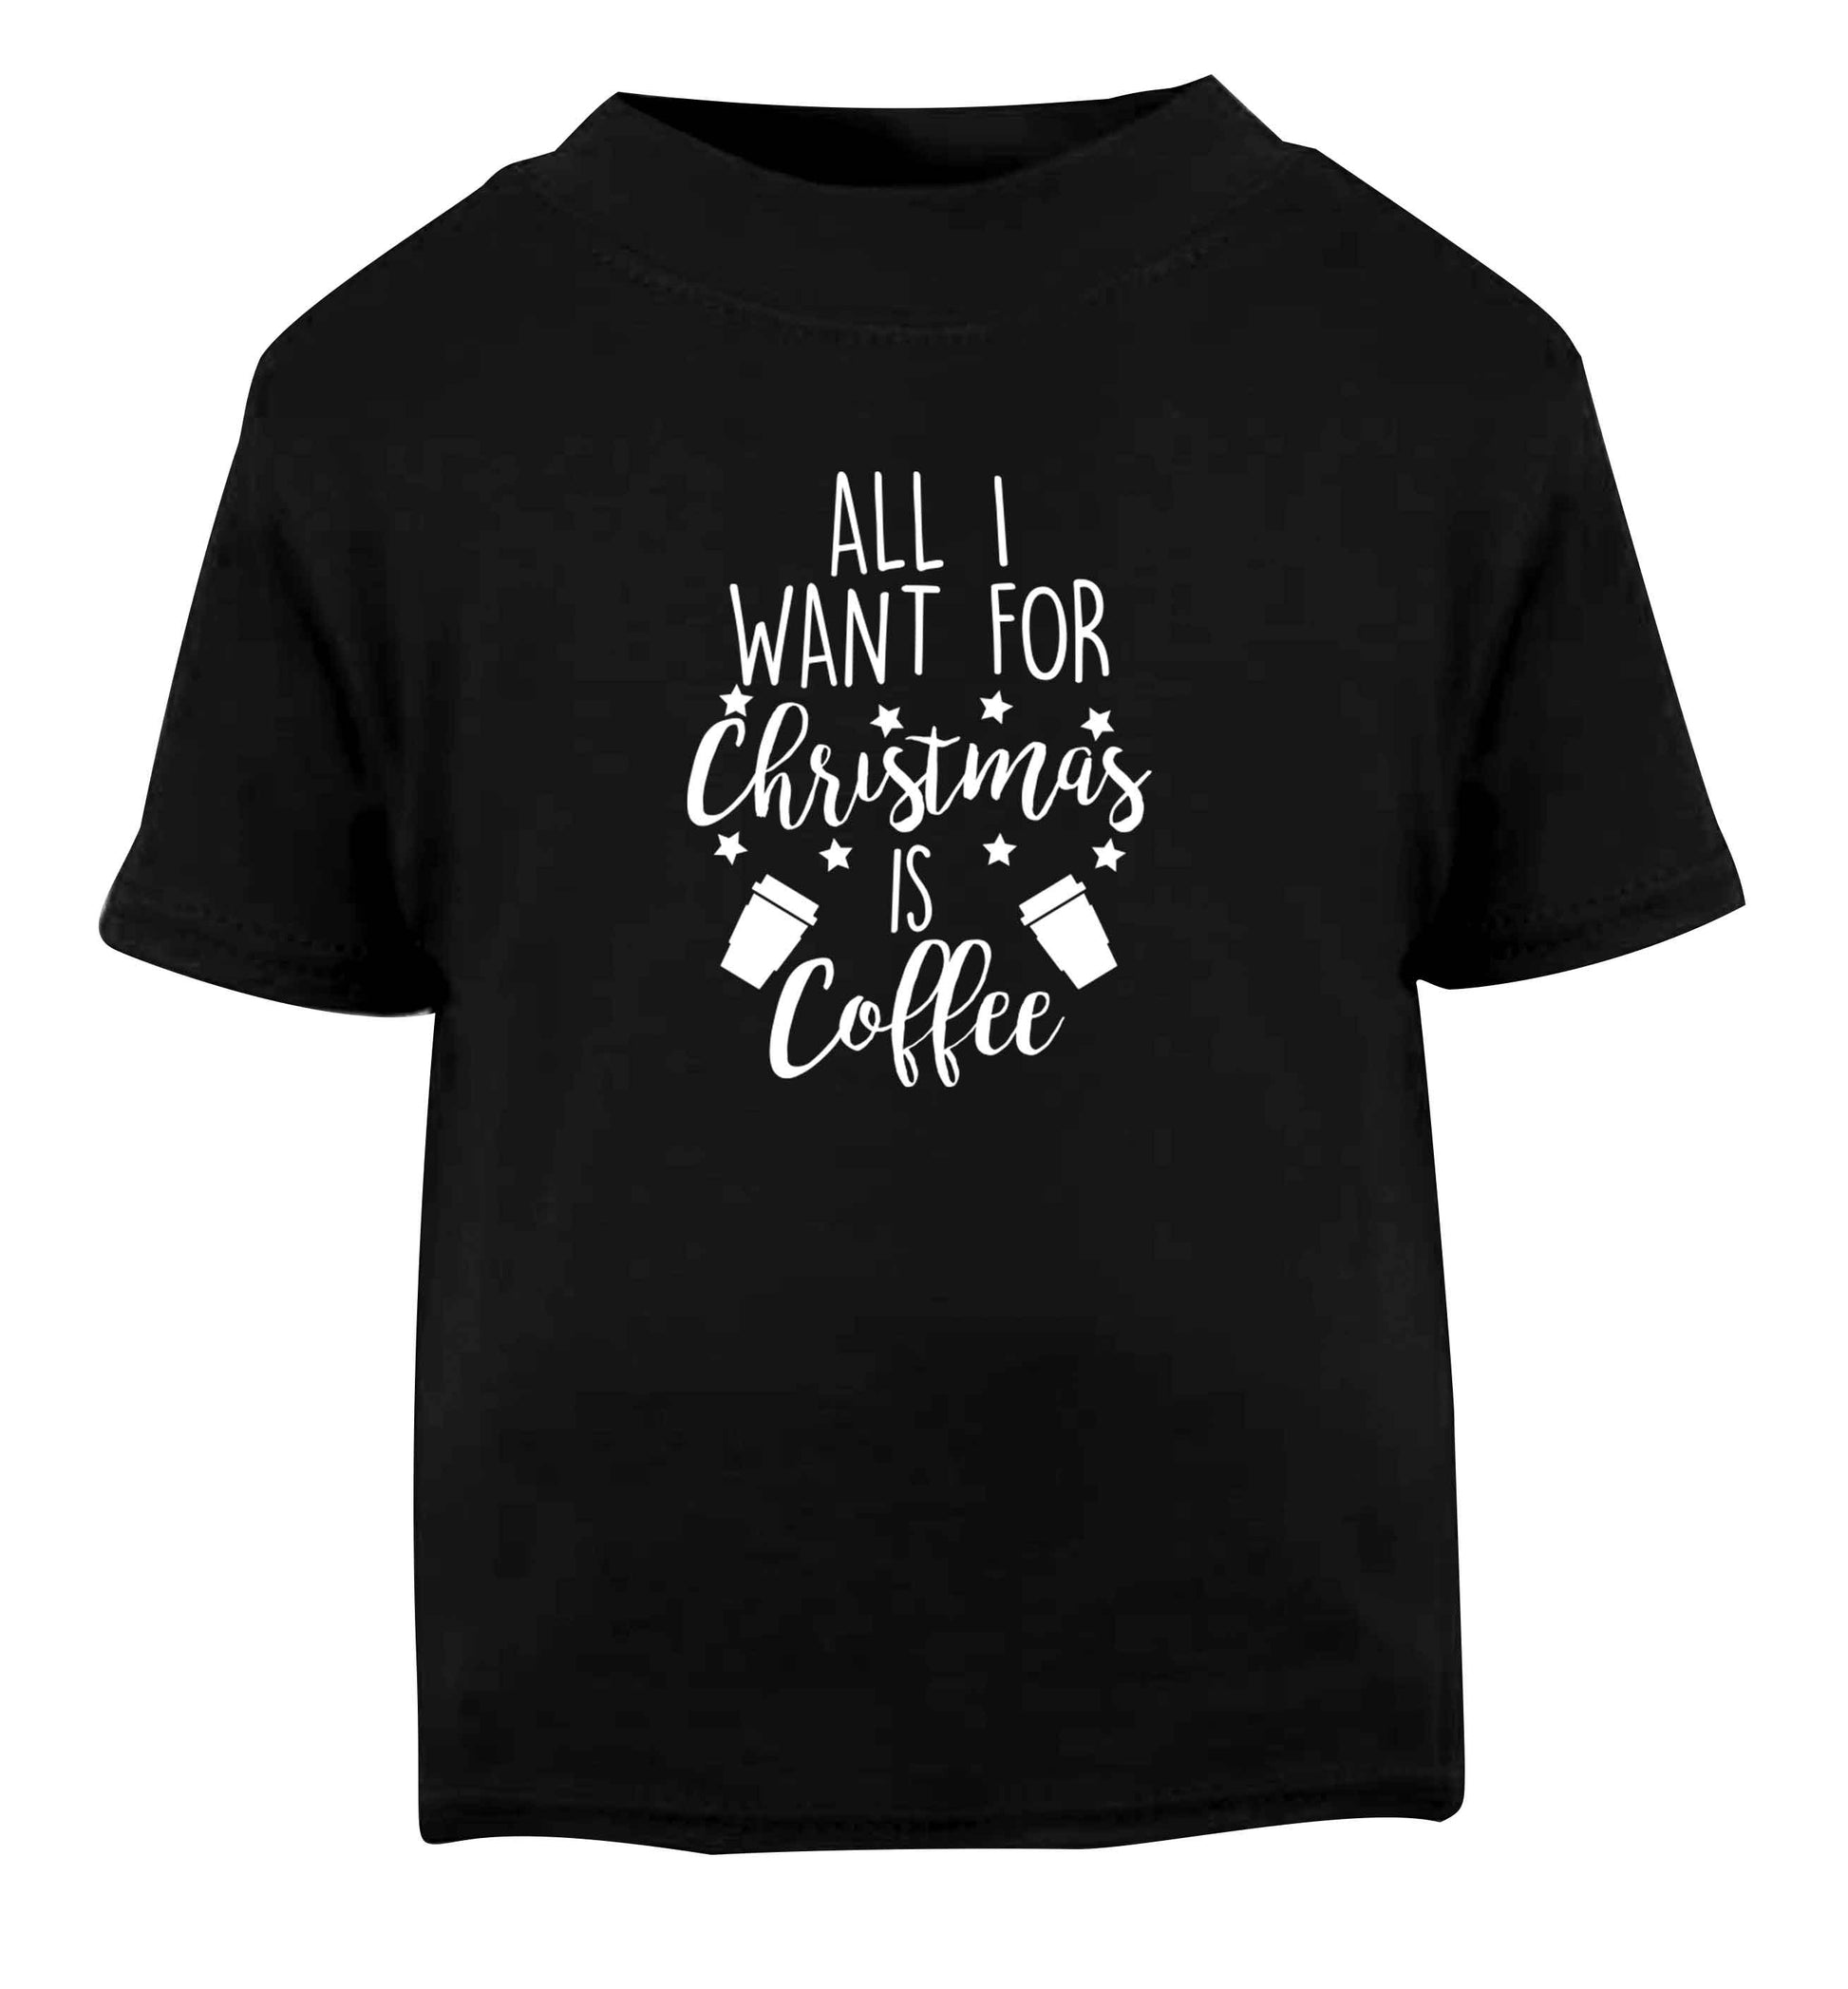 All I want for Christmas is coffee Black Baby Toddler Tshirt 2 years